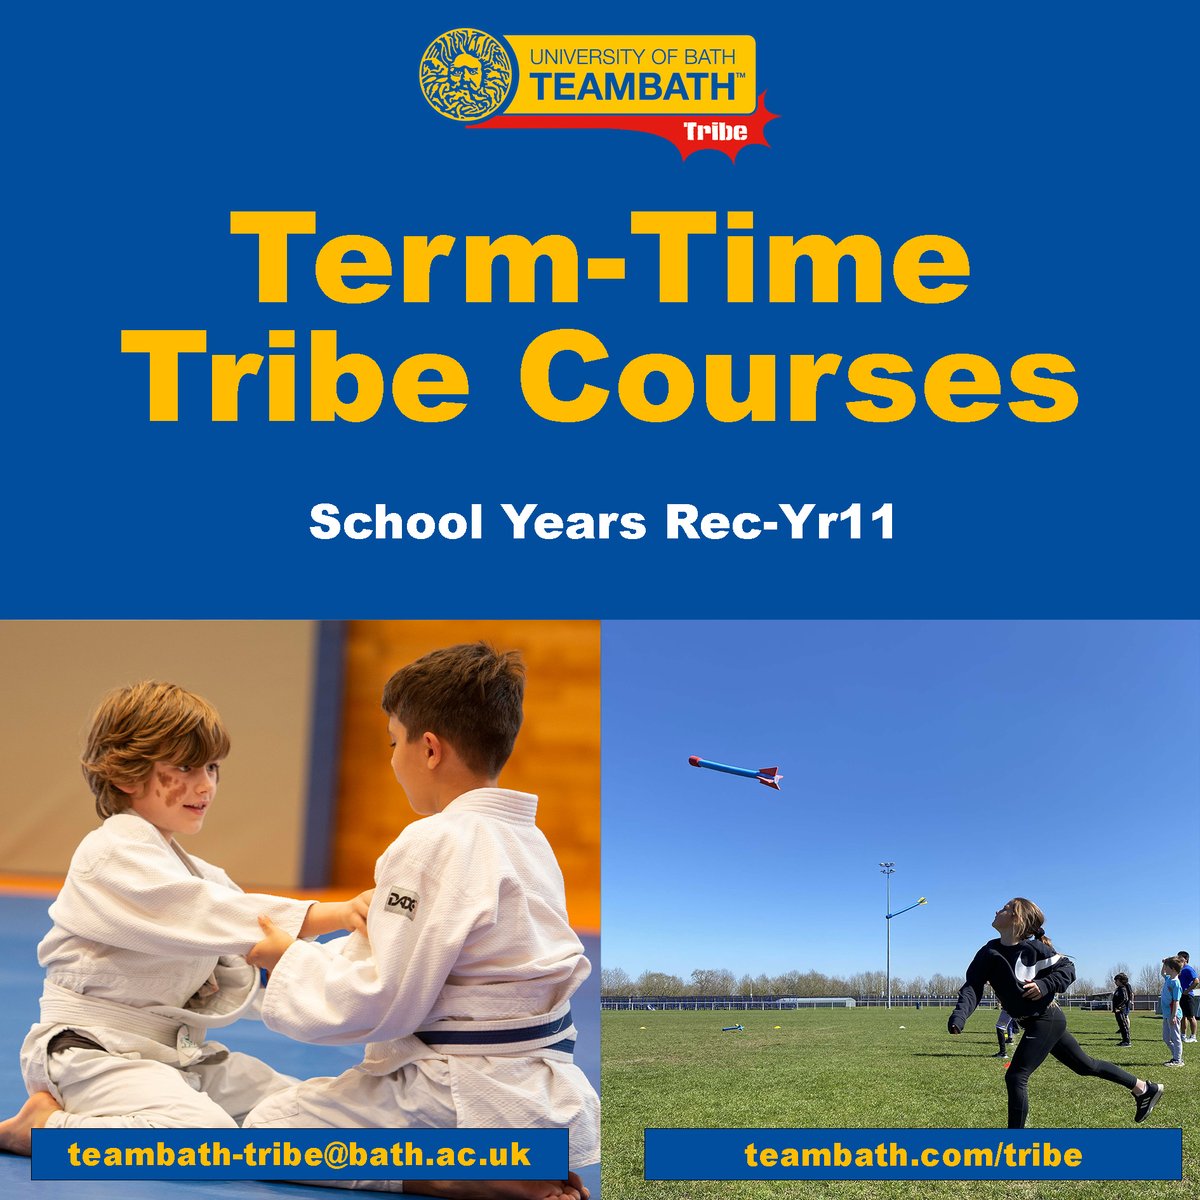 Start something new this #Spring with Team Bath Tribe's Term-Time #SportsCourses 🏃‍➡️ Get one FREE trial session when you book between 15th-20th April👏 teambath.com/tribe-schools/… #YouthSport #KidsActivities #TermTime #Judo #Trampolining #Athletics #Swimming #Netball #Badminton